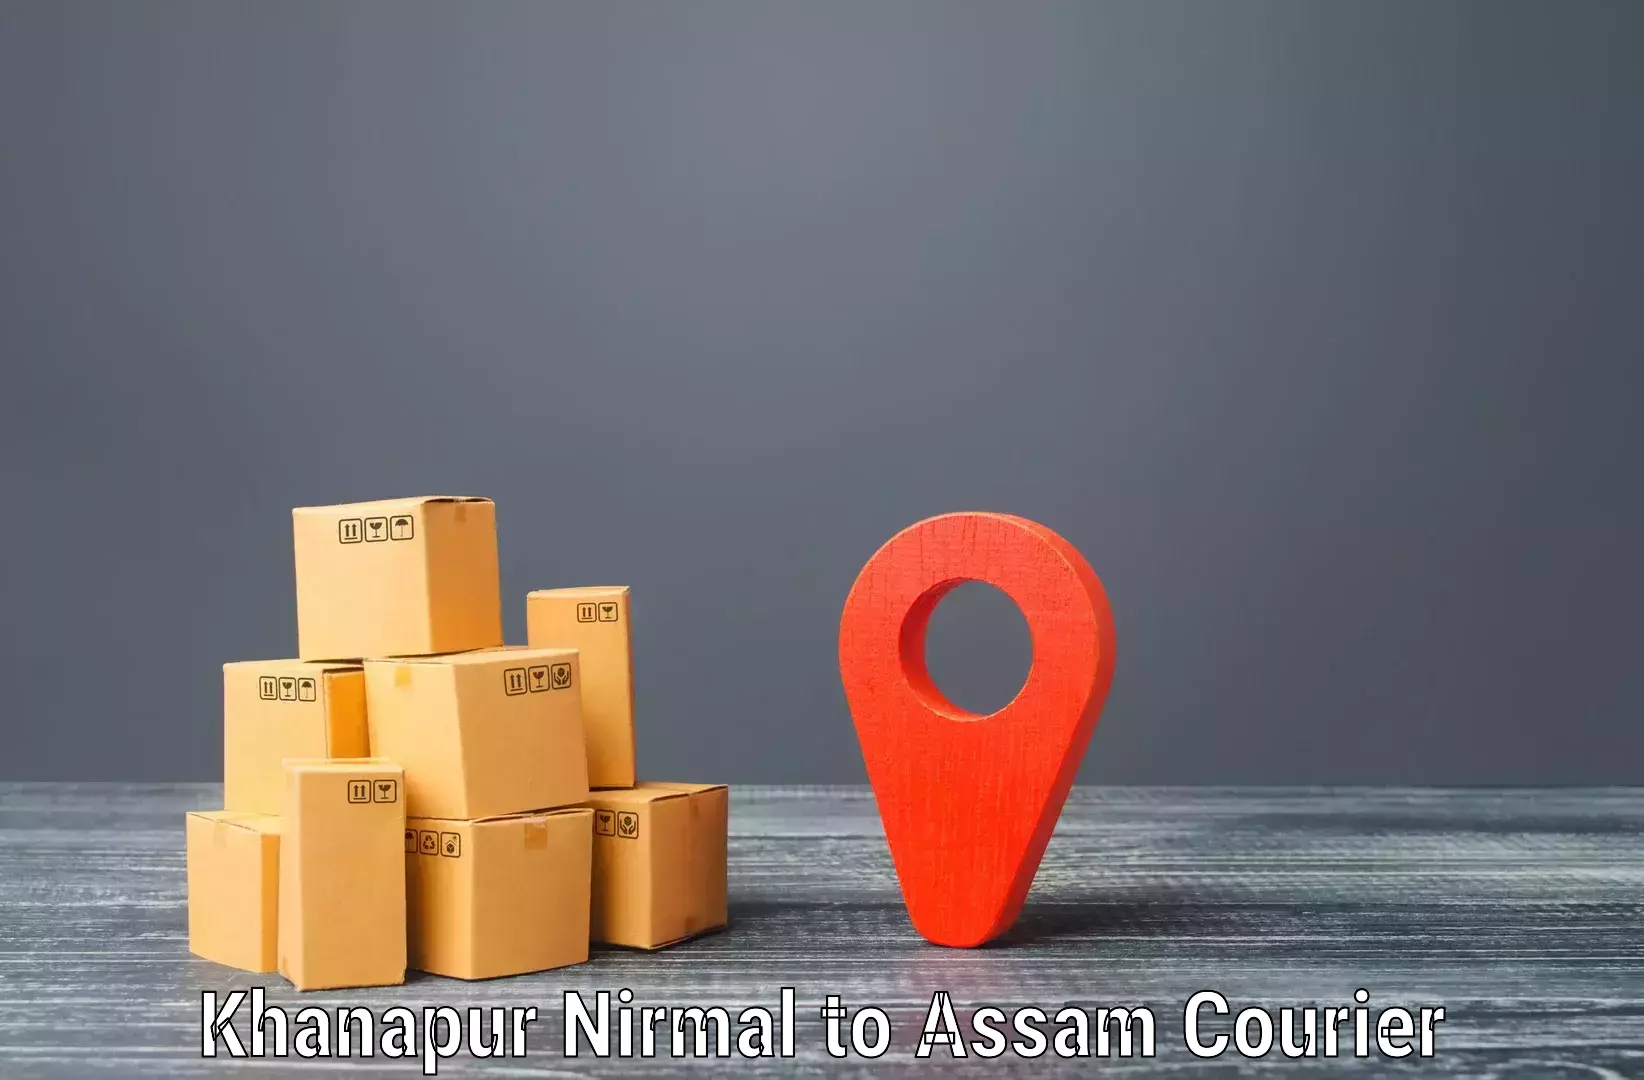 On-demand delivery in Khanapur Nirmal to Karbi Anglong